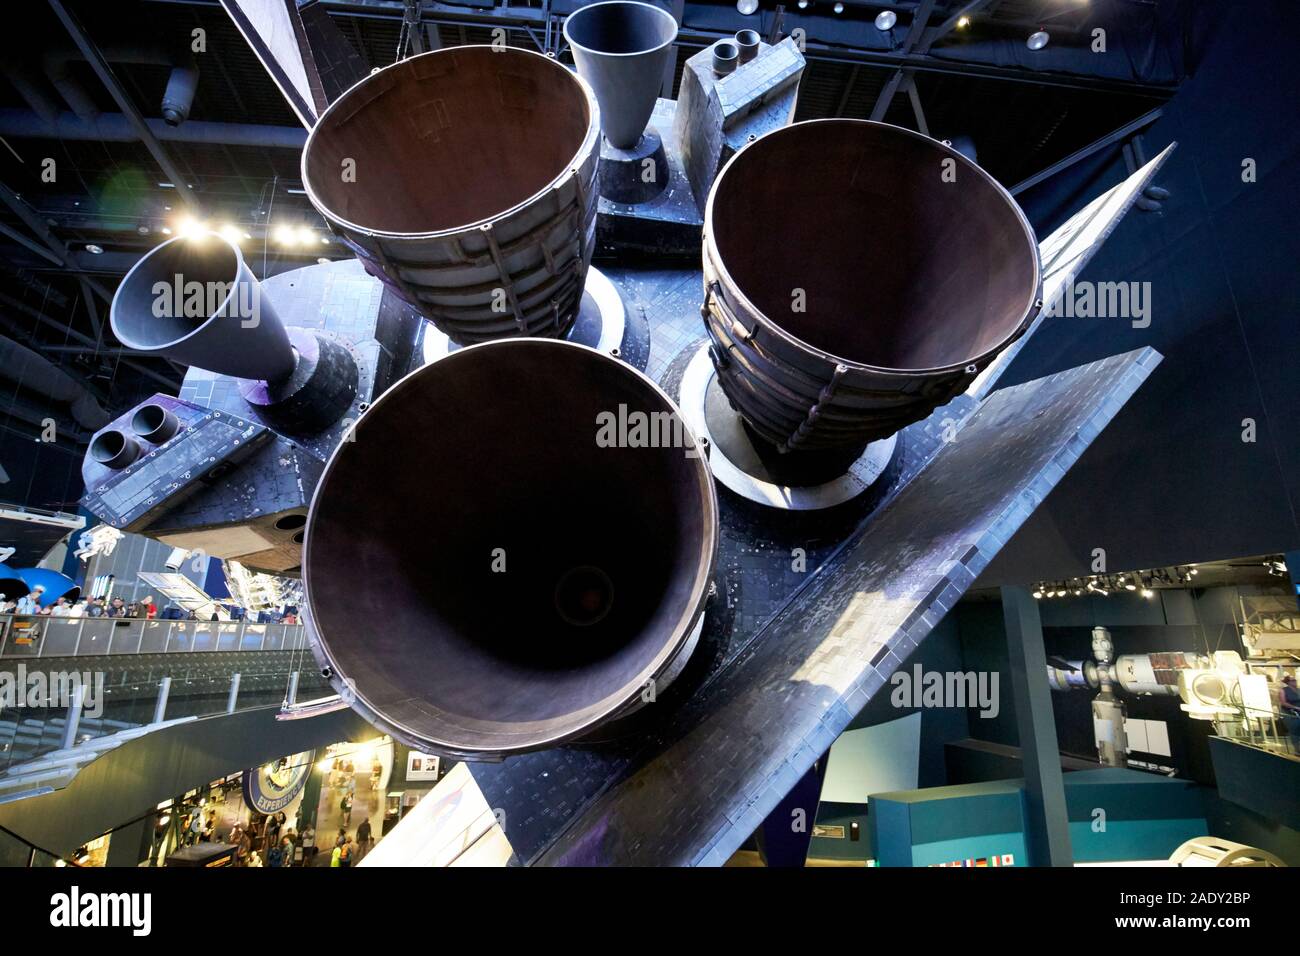 engines thrusters and boosters on the space shuttle atlantis on display in the kennedy space center florida usa Stock Photo